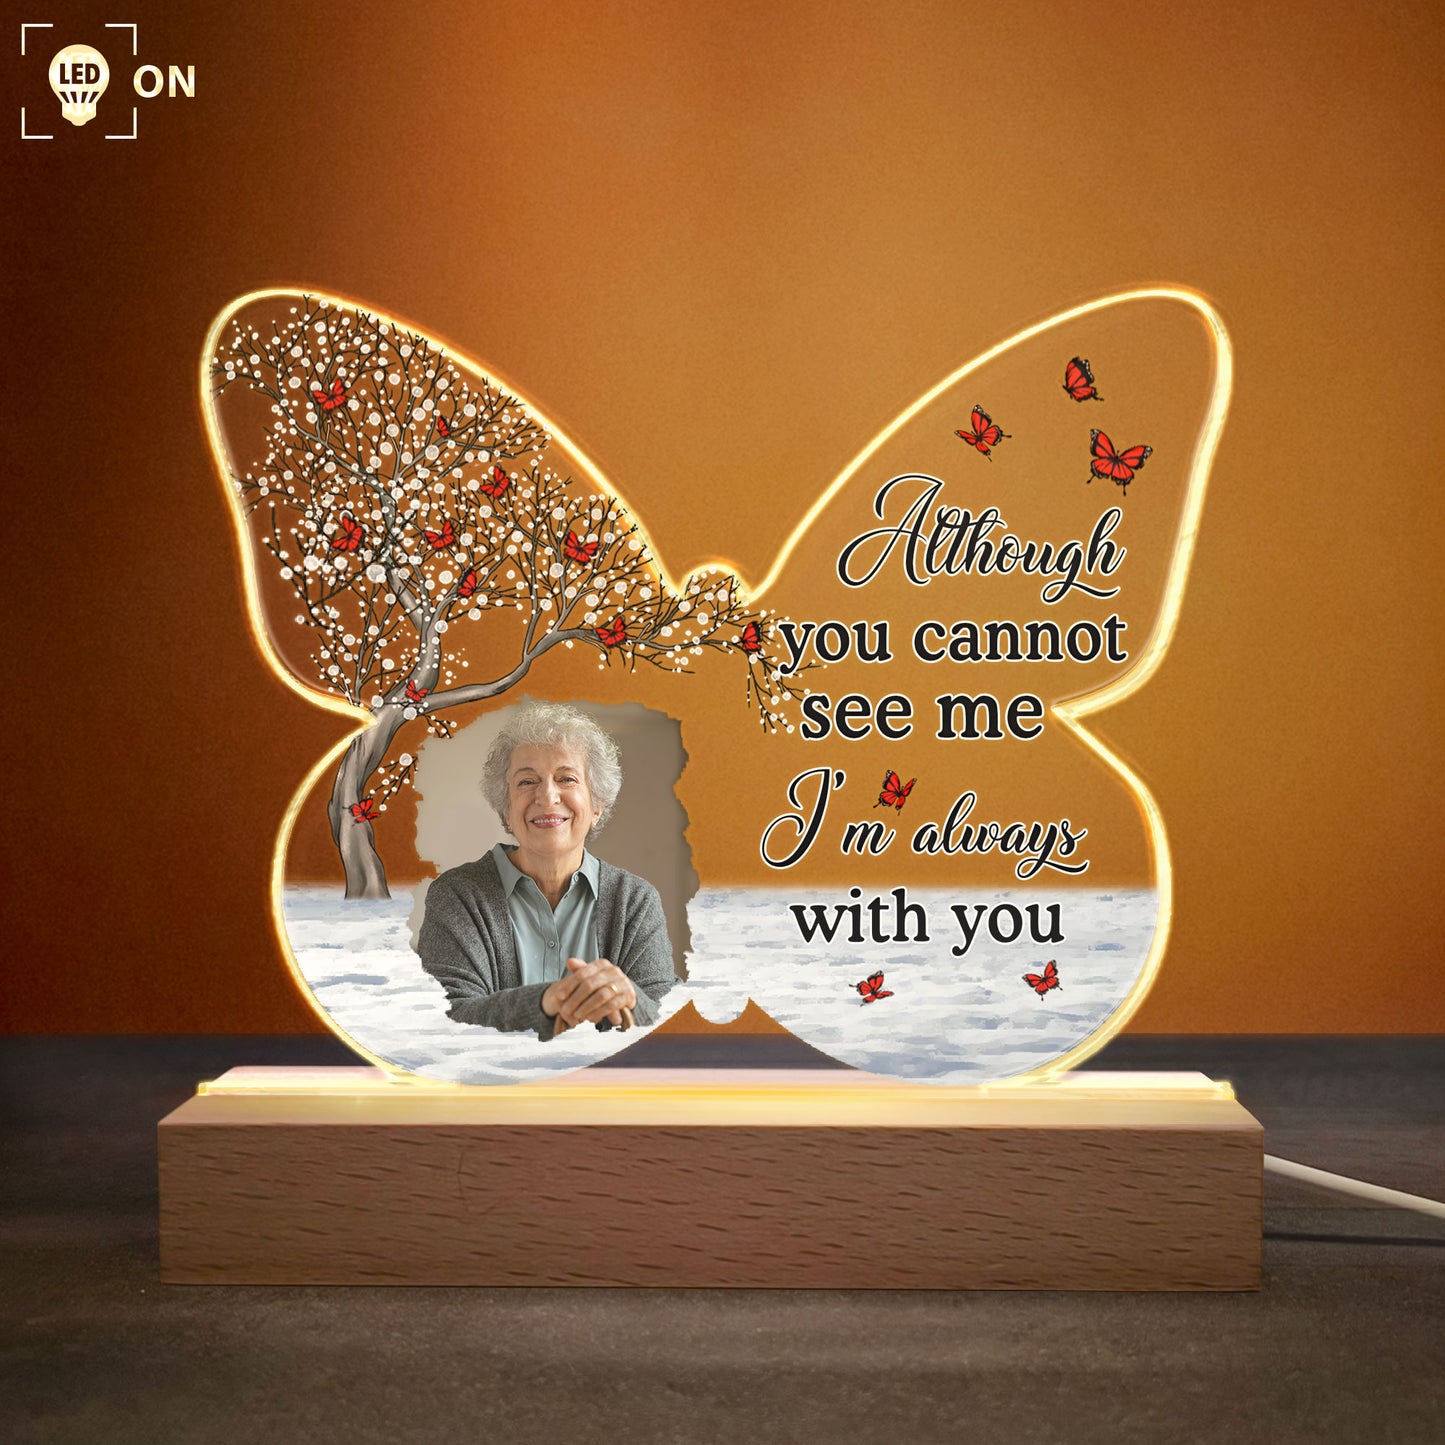 Although You Cannot See Me I'm Always With You - Personalized Photo LED Light